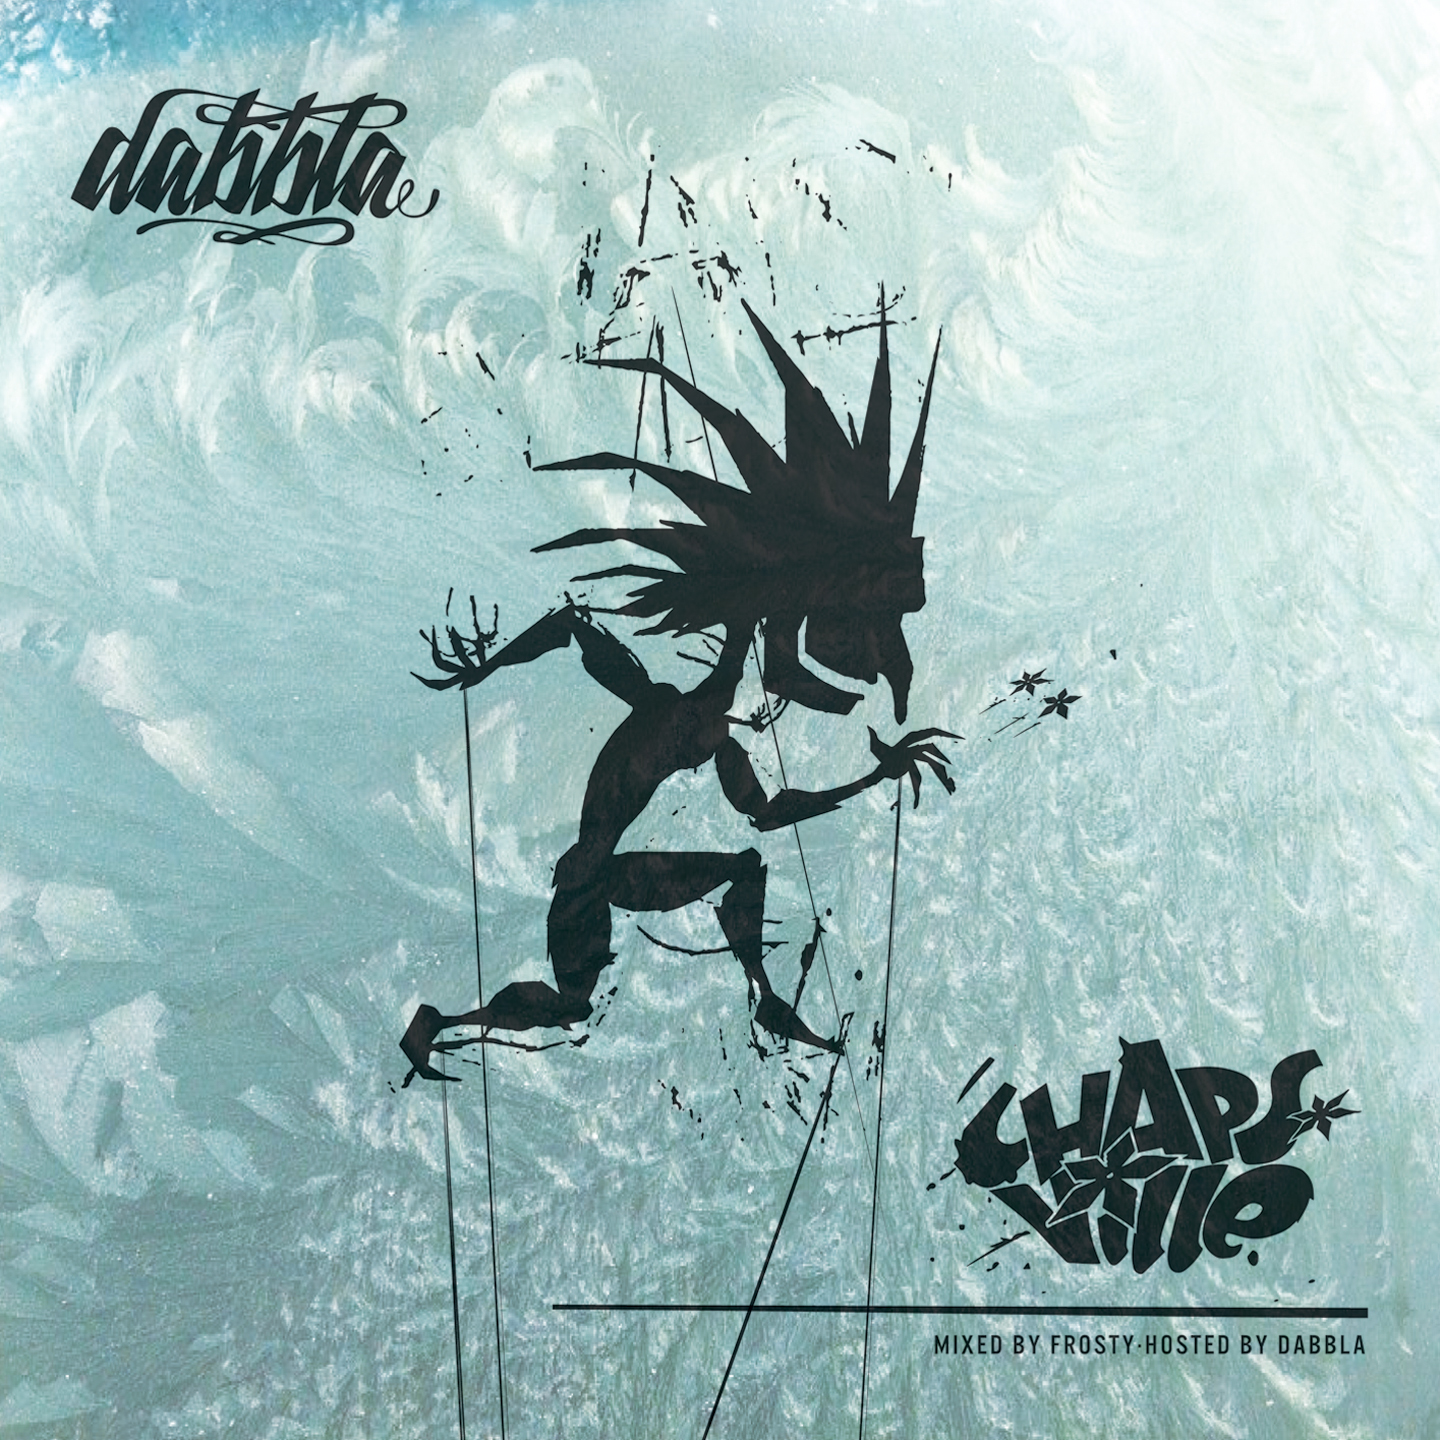 Interview with Dabbla and DJ Frosty